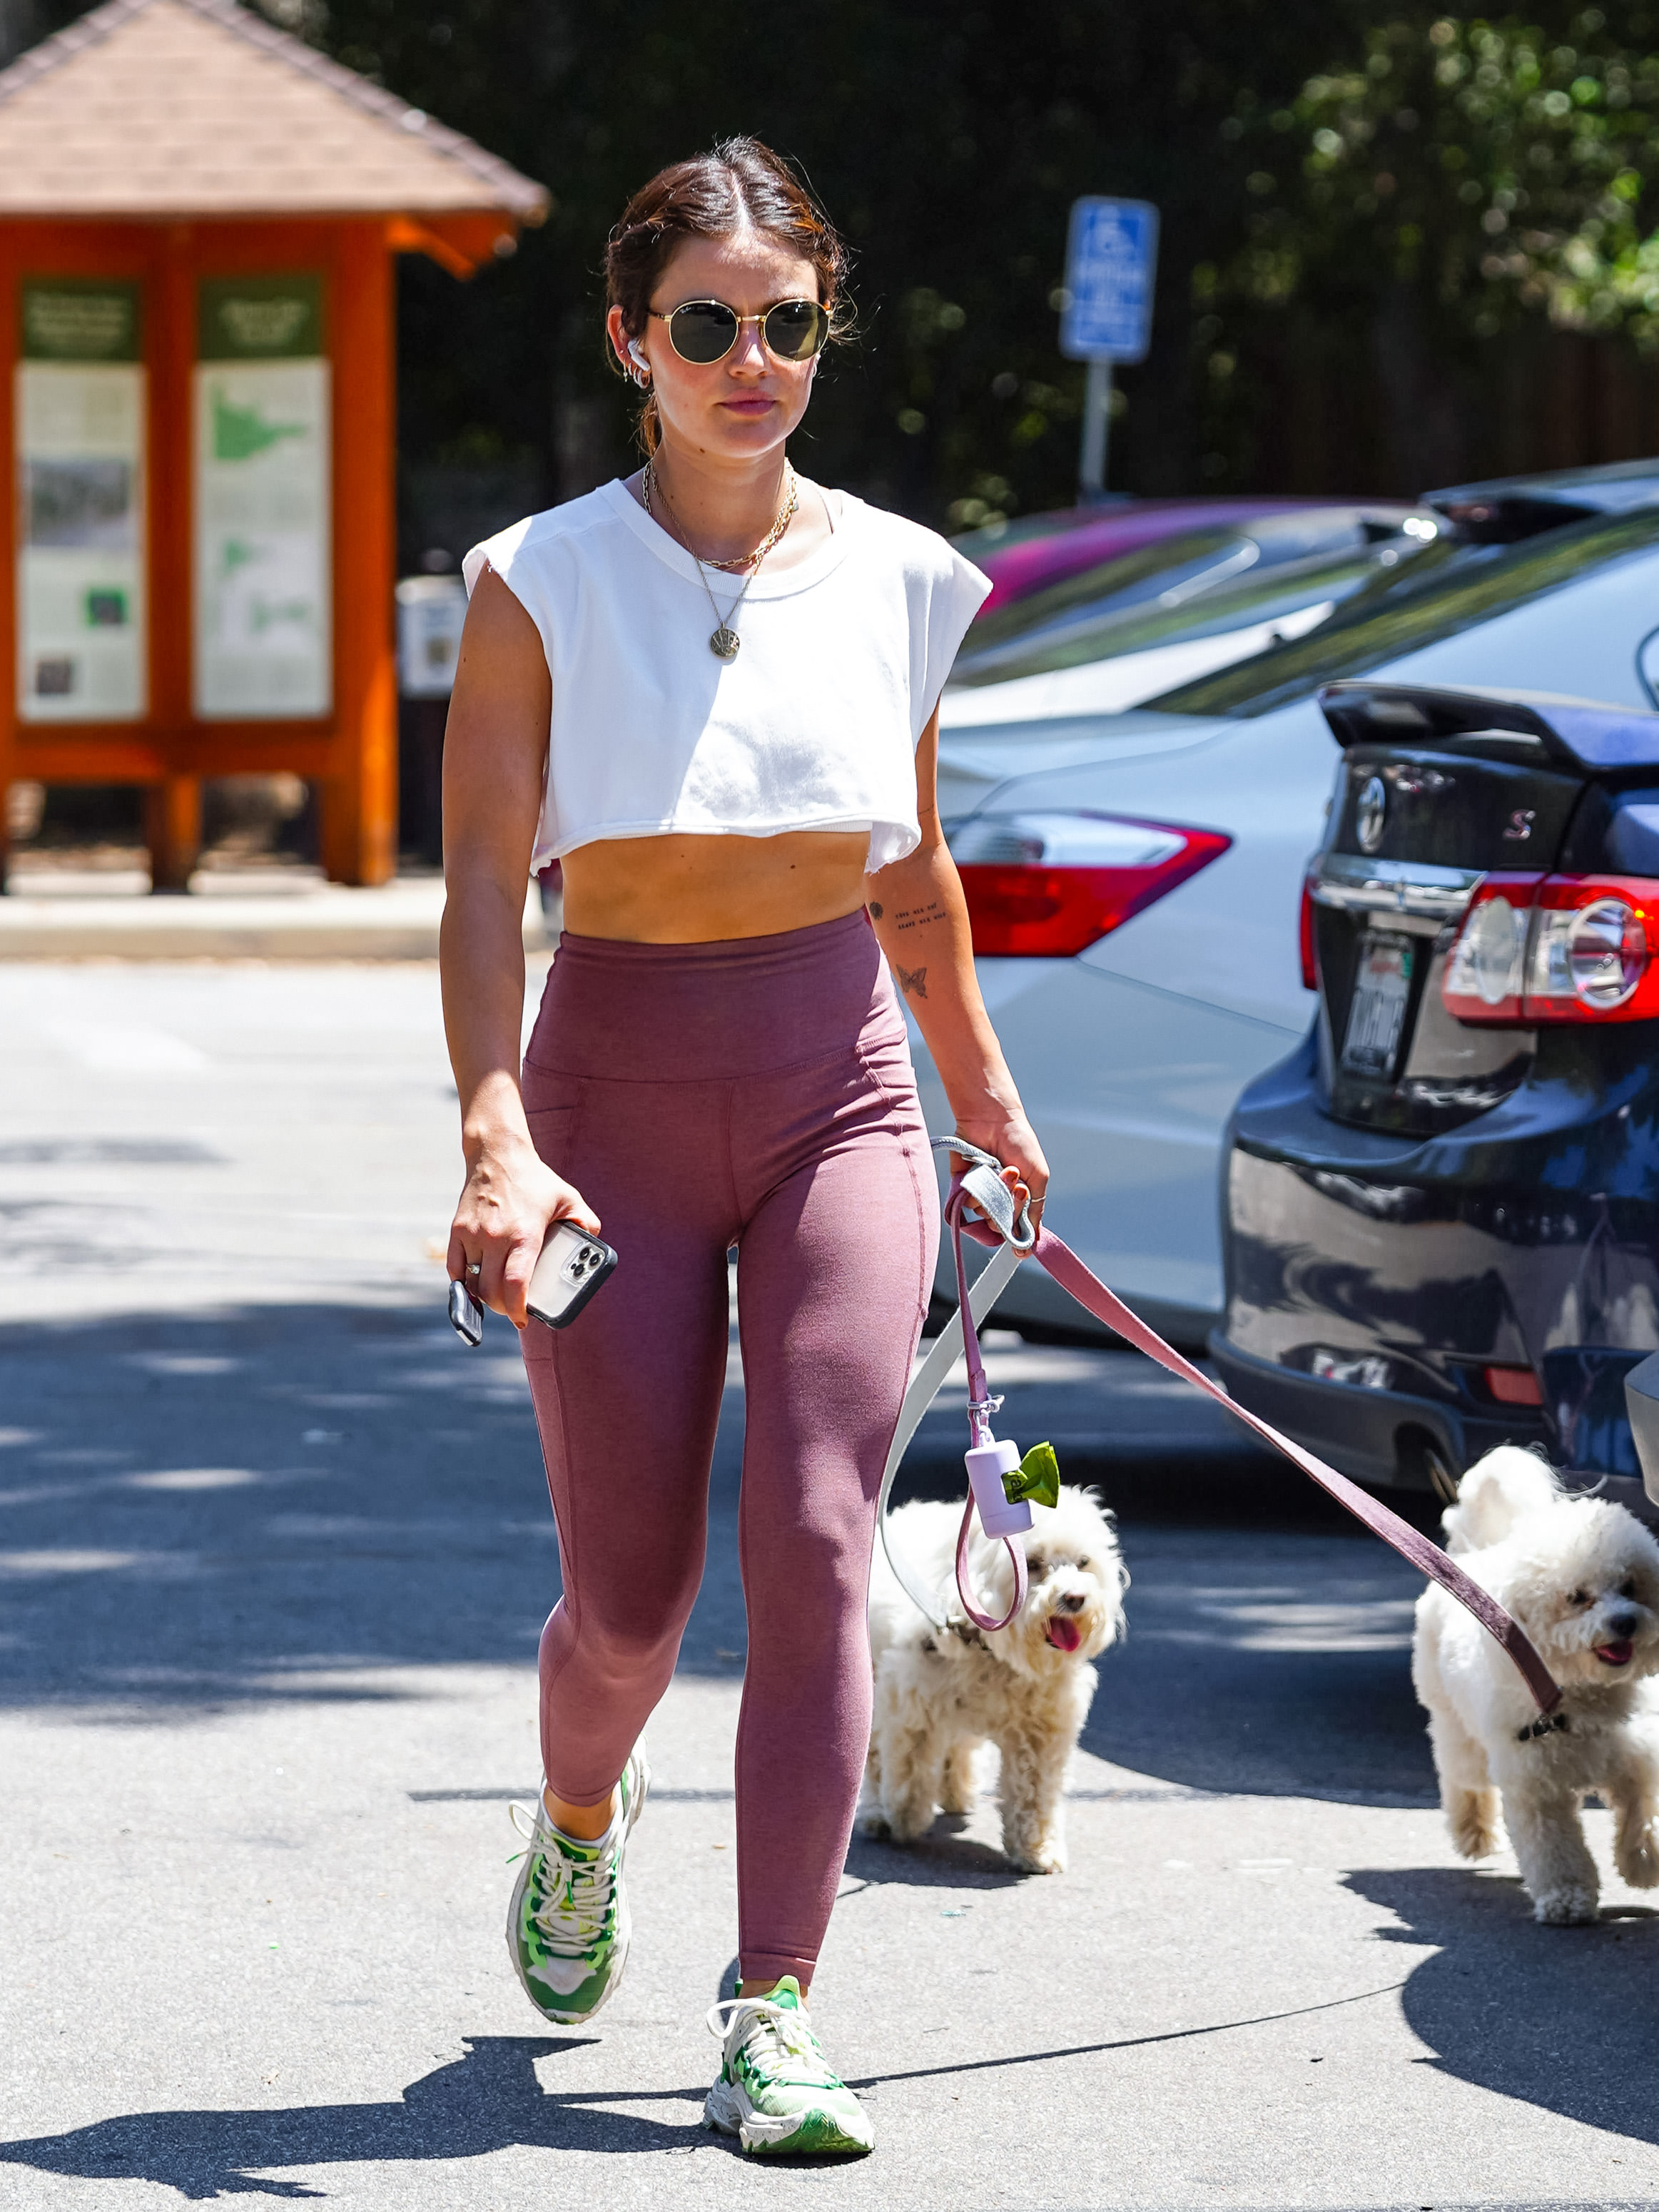 Lucy Hale hit the streets of Studio City for a workout, donning a jogging outfit and taking the opportunity to take her pets for a walk.  She wore leggings and a white top, in addition, she was listening to music on her headphones